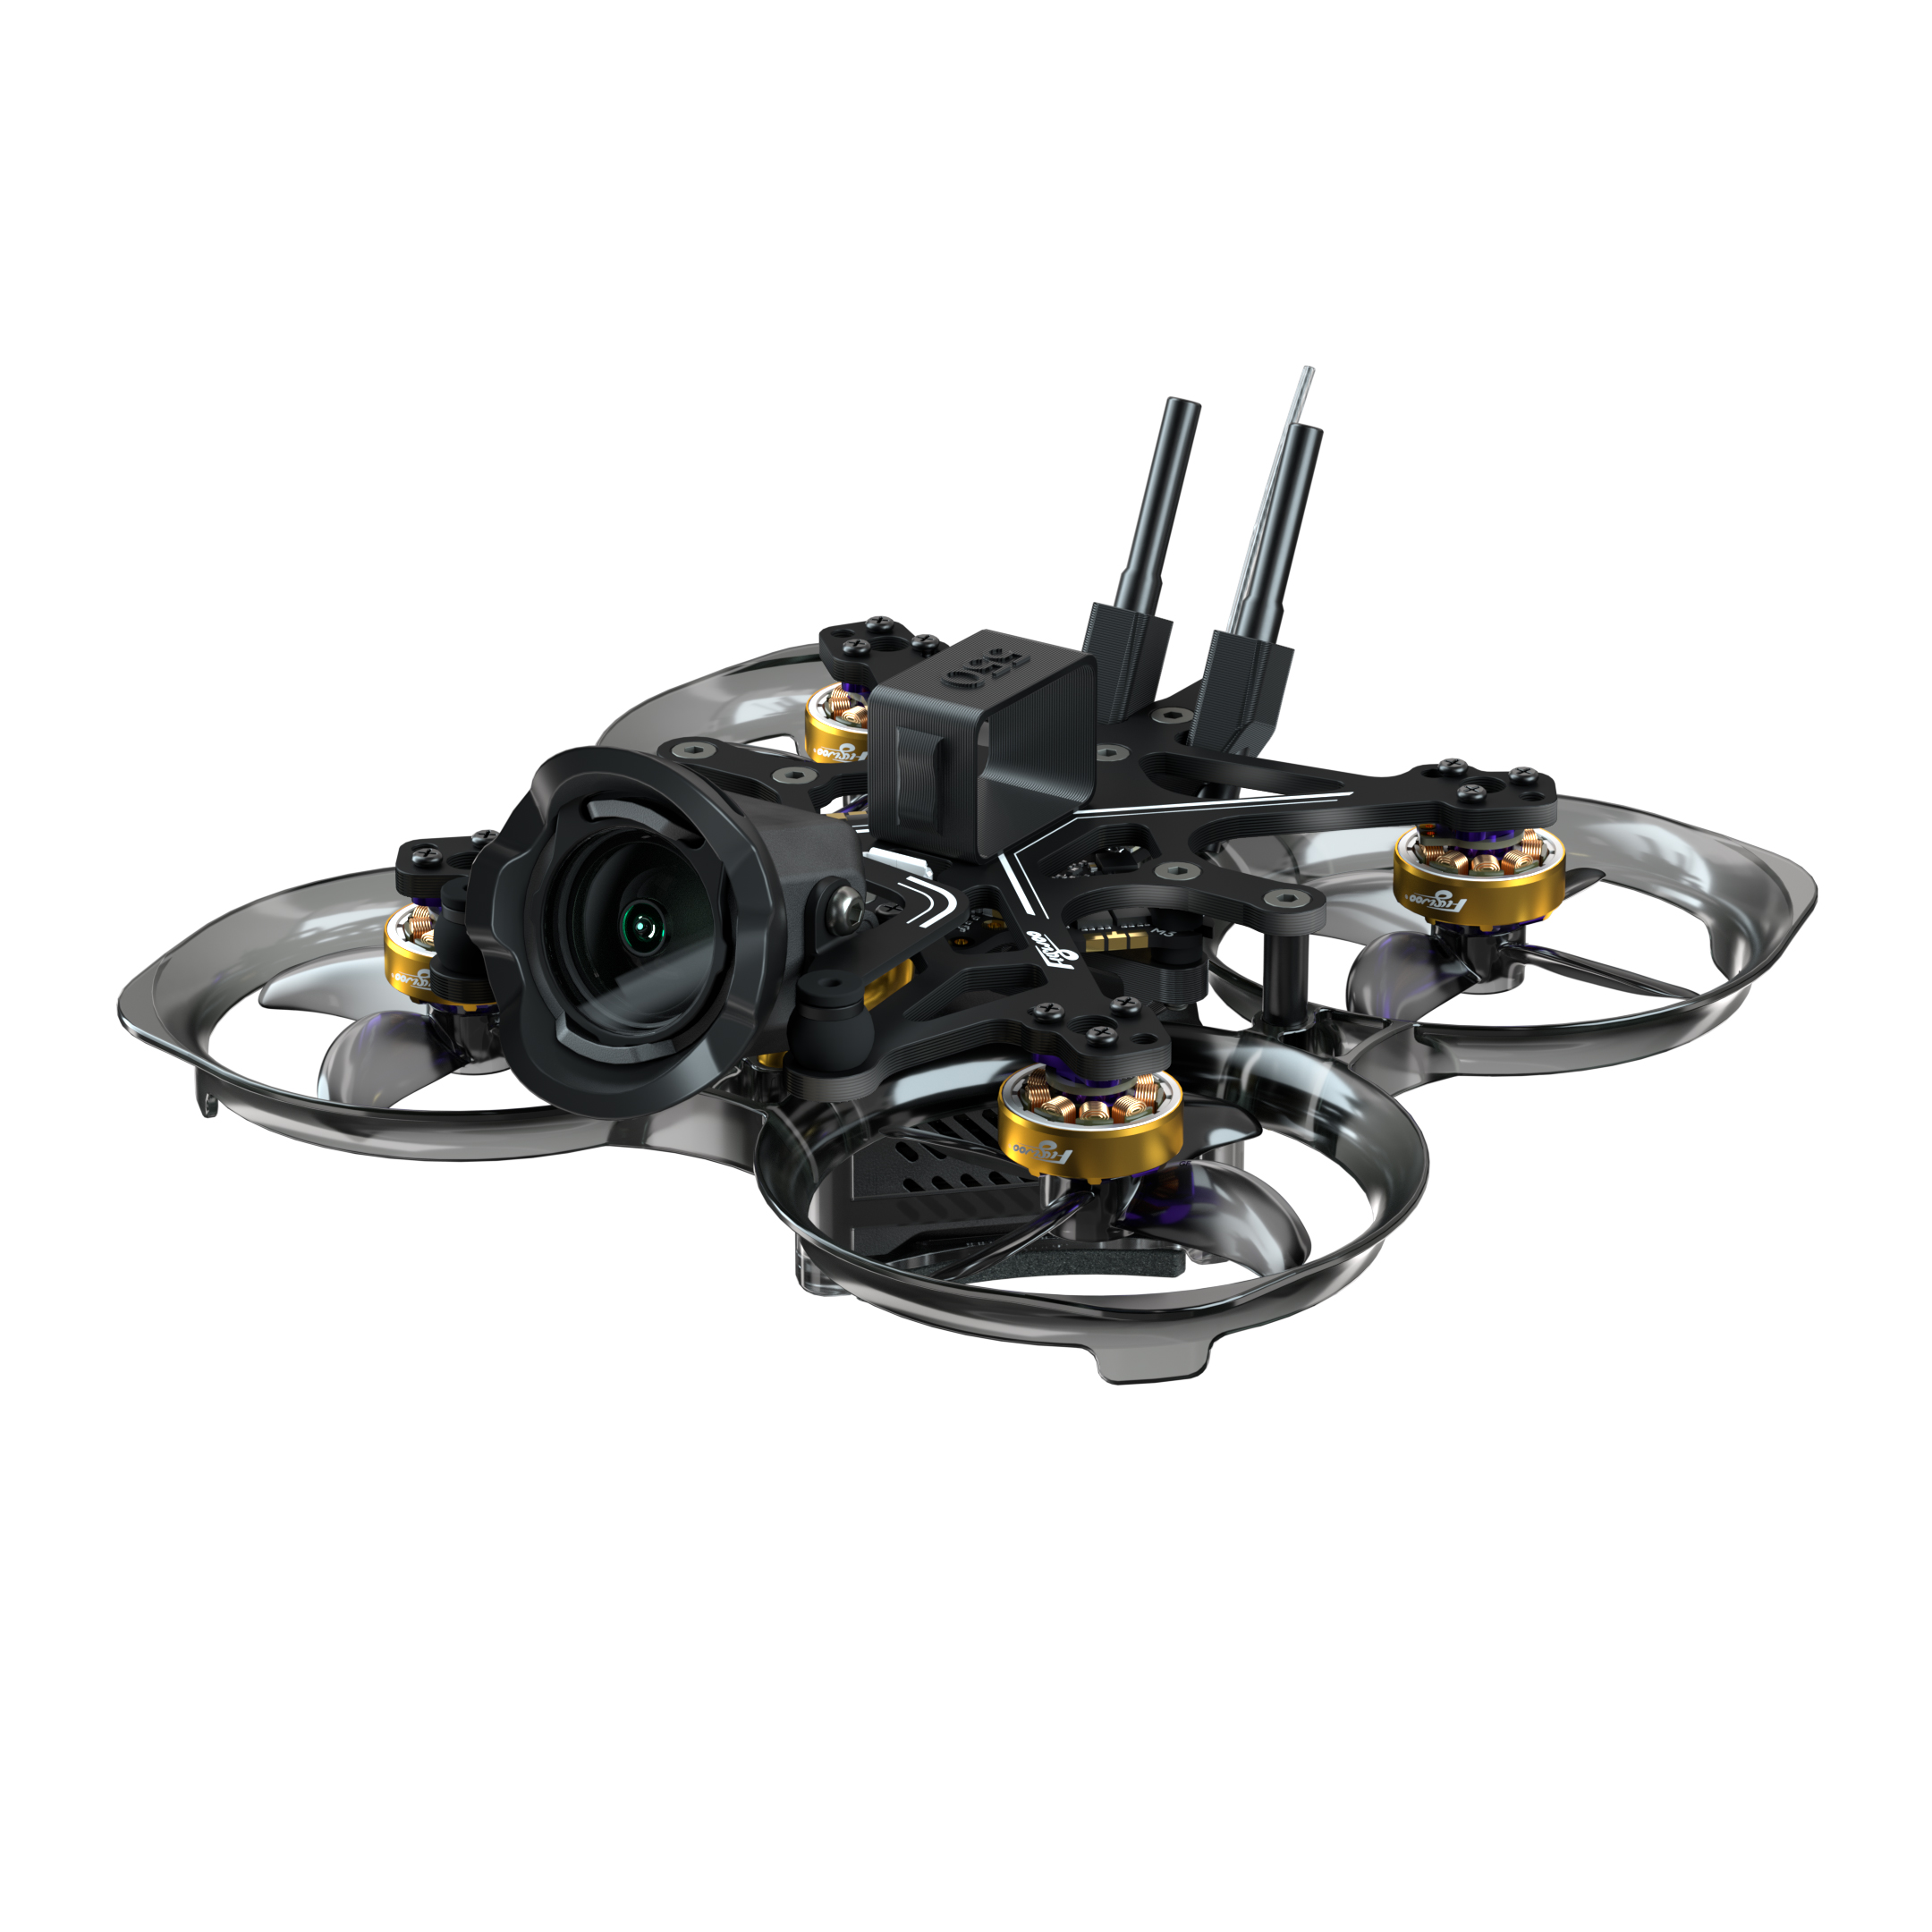 HD Flying Drone Supplier,Wholesale HD Flying Drone Supplier from